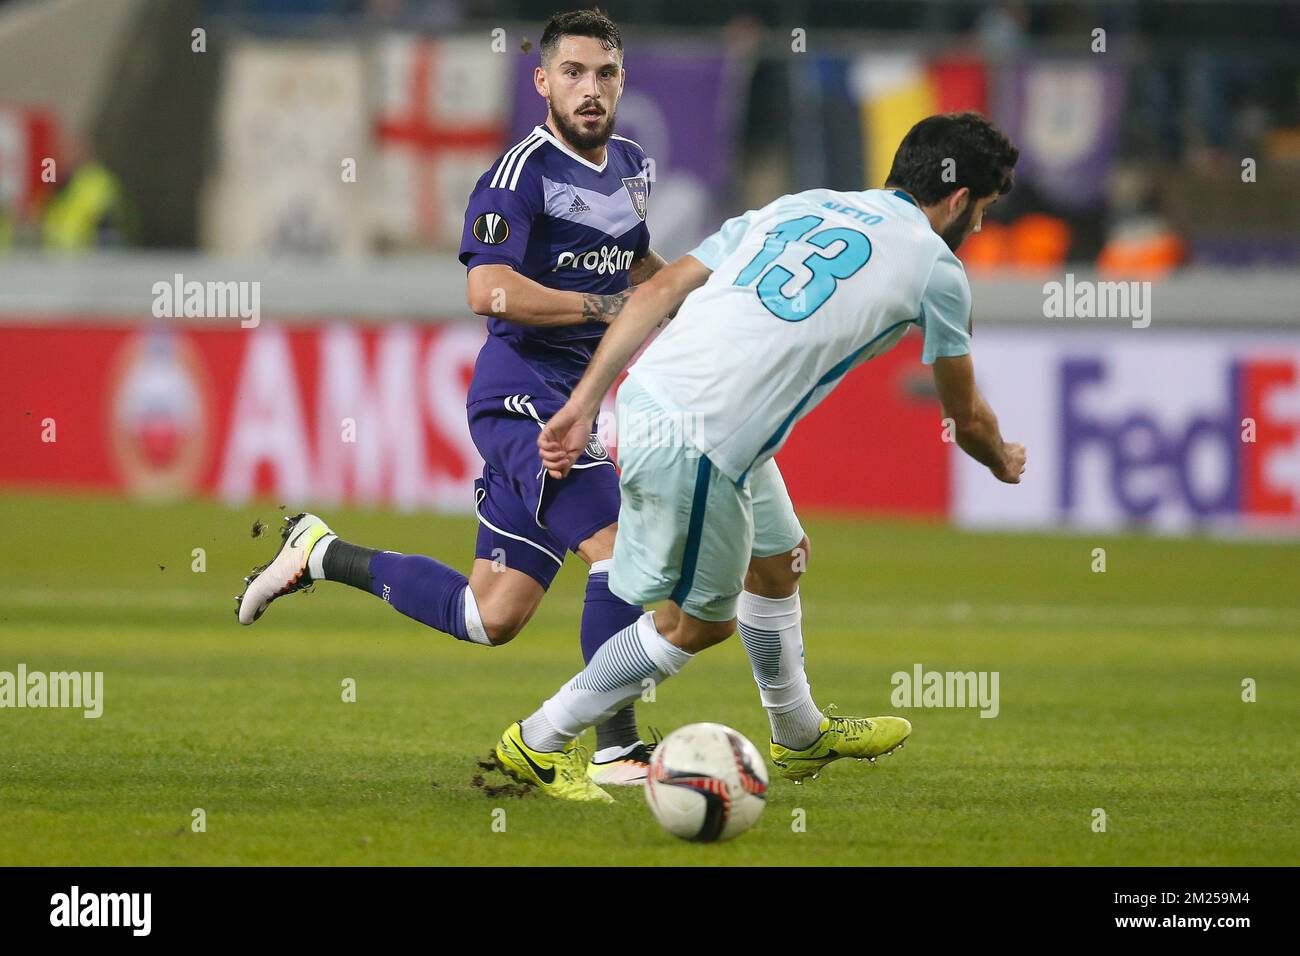 Anderlecht's Nicolae-Claudiu Stanciu and Zenit's defender Luis Neto fight for the ball during a game between Belgian soccer team RSC Anderlecht and Russian team FC Zenit, first-leg of the 1/16 finals of the Europa League competition, Thursday 16 February 2017, in Brussels. BELGA PHOTO BRUNO FAHY Stock Photo